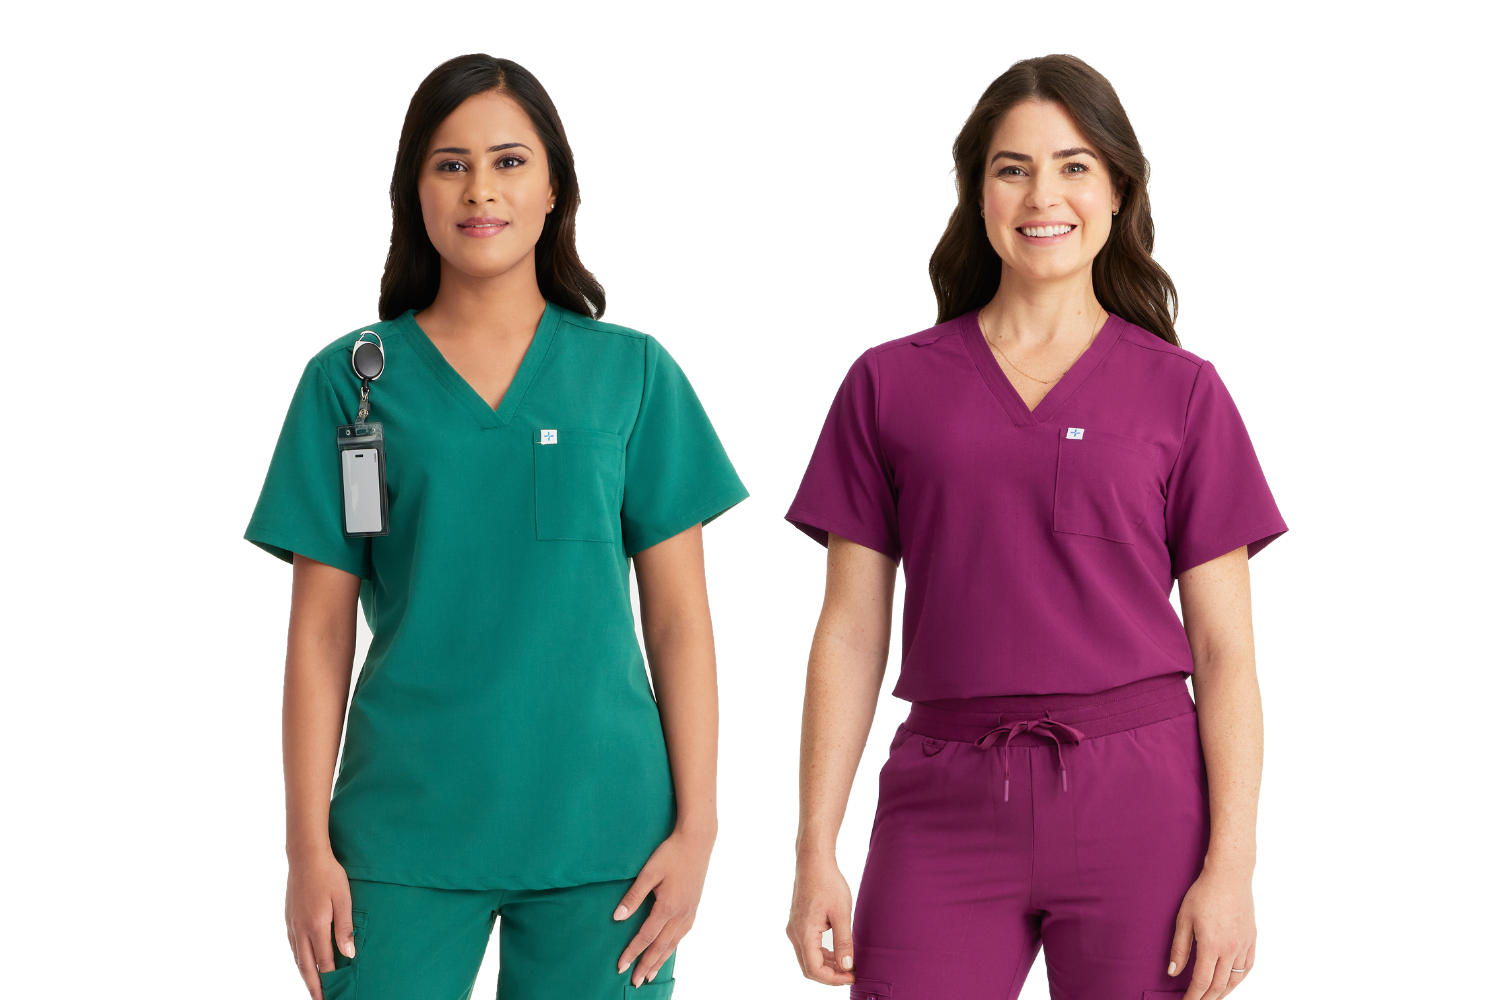 Care+Wear Introduces New Colors to Its Popular Line of Premium Scrubs